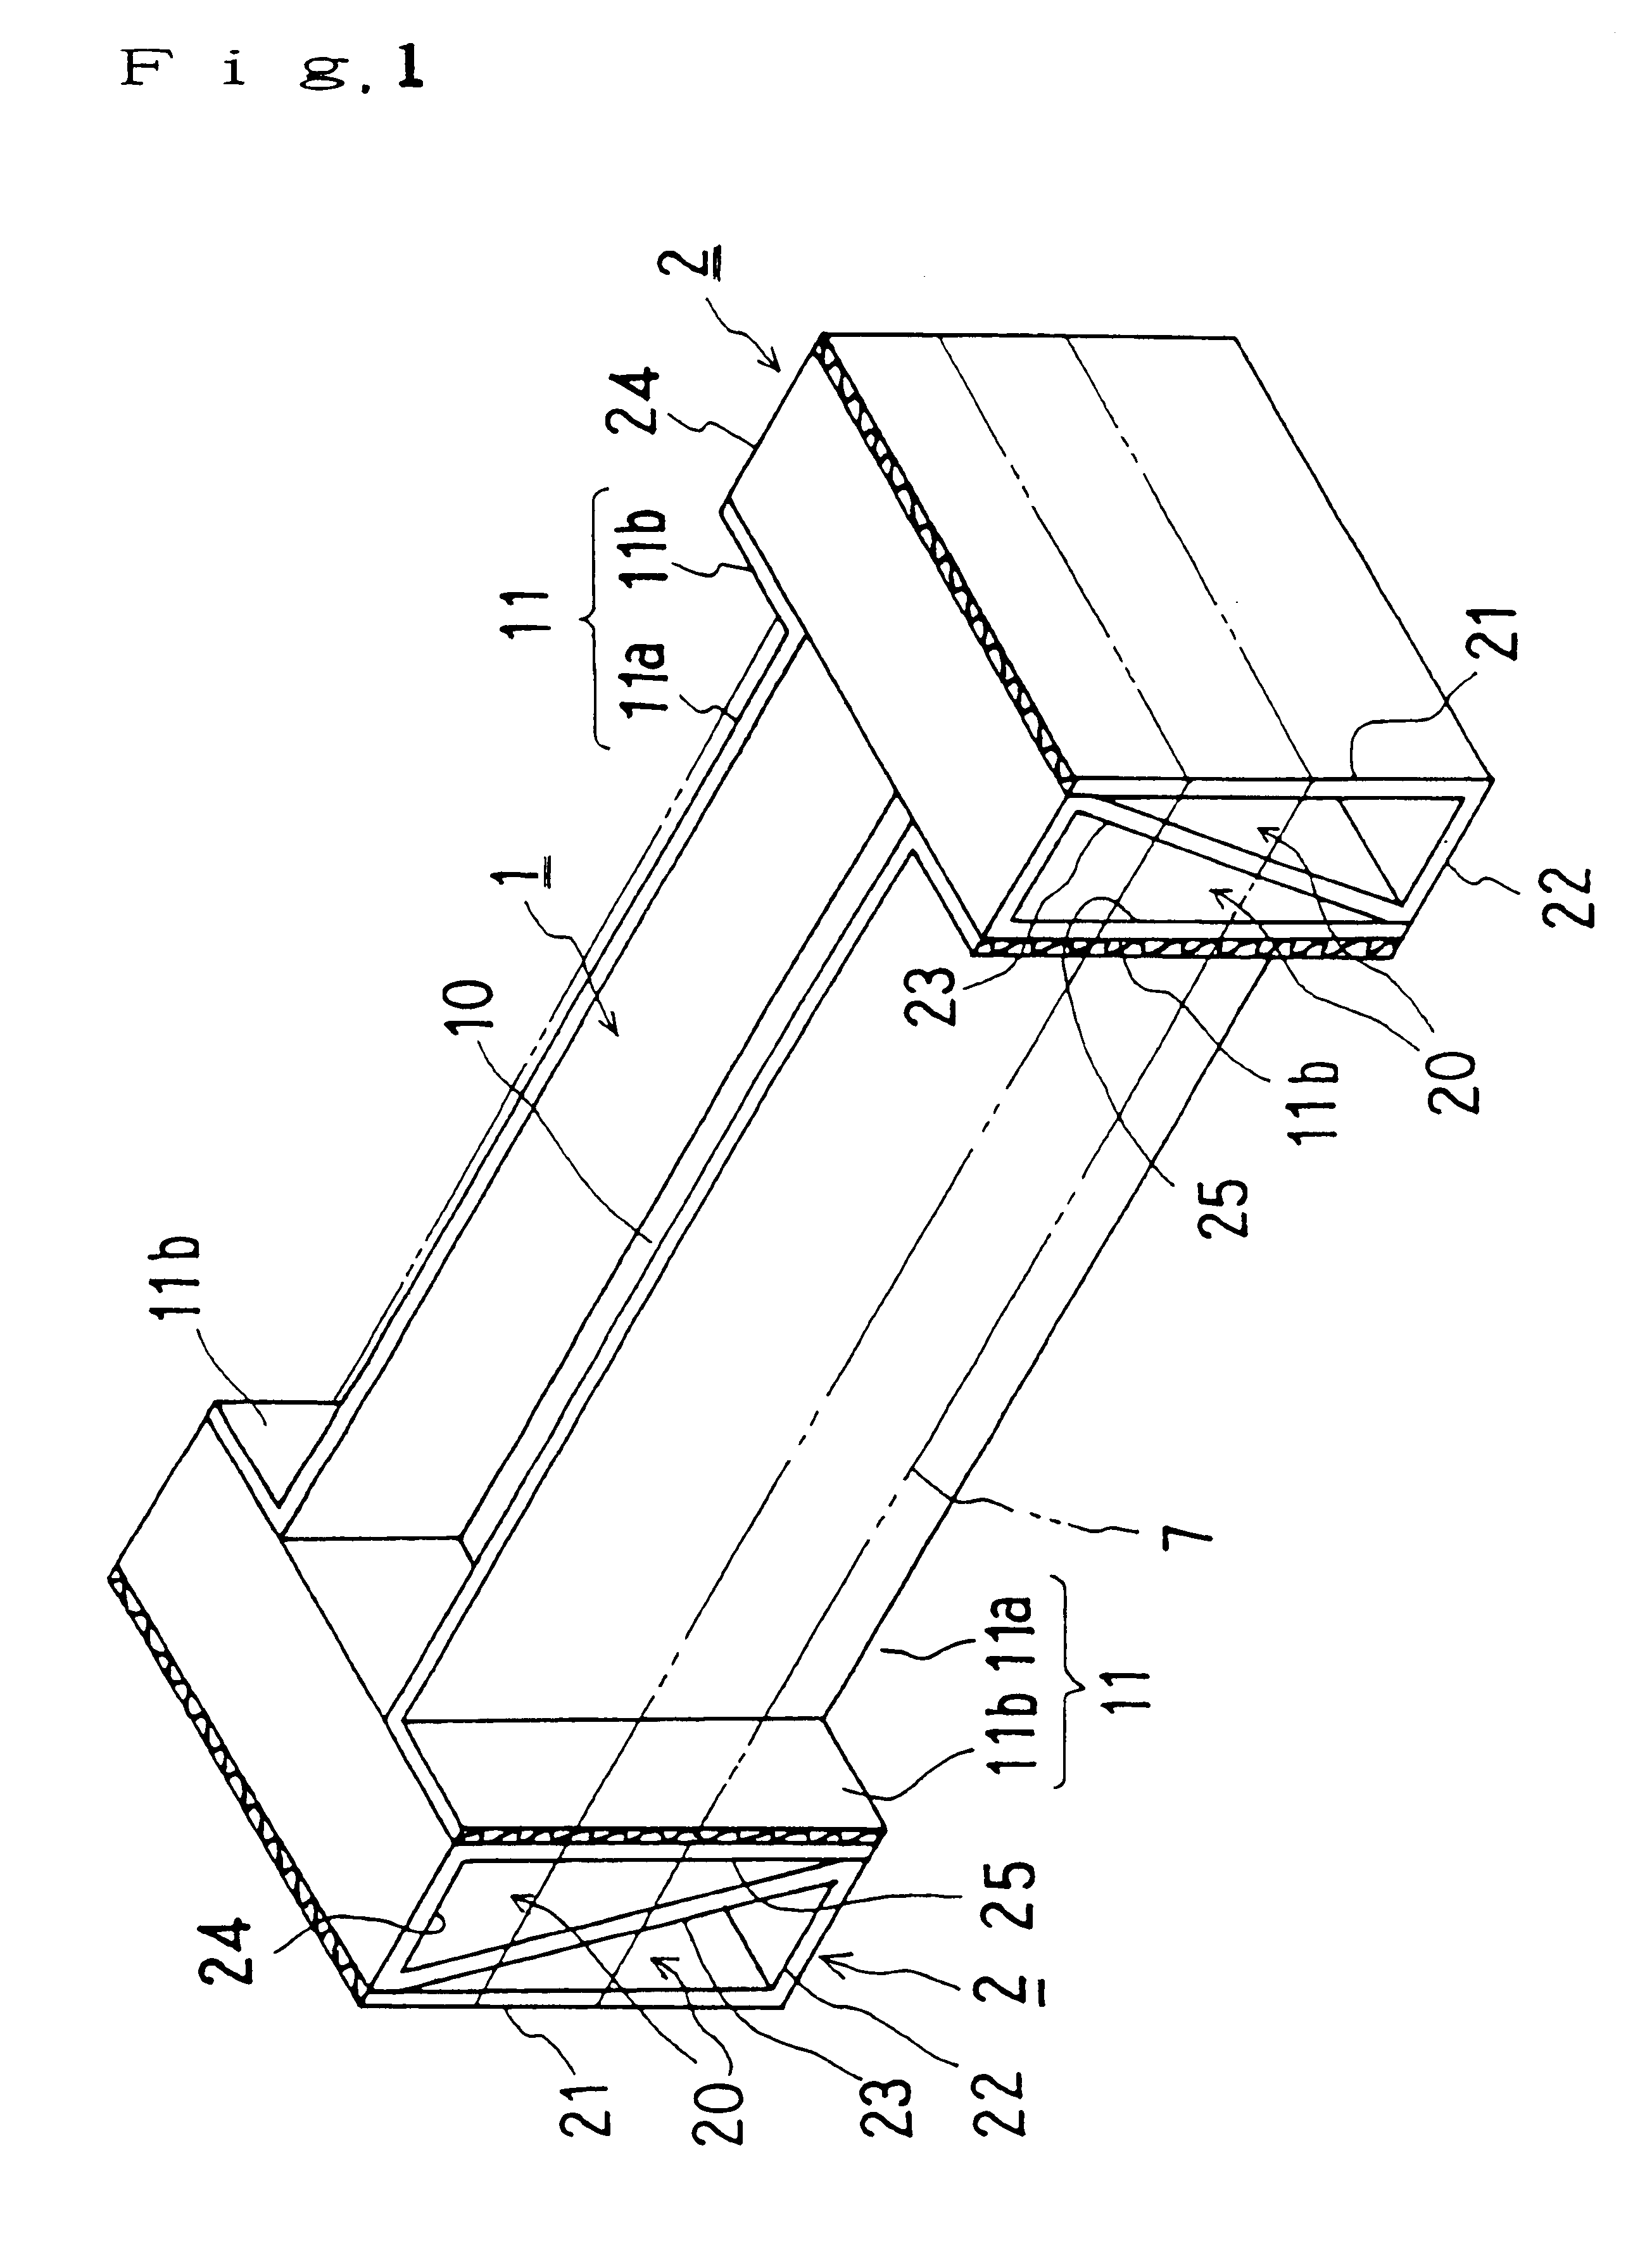 Folded cushioning material for packaging